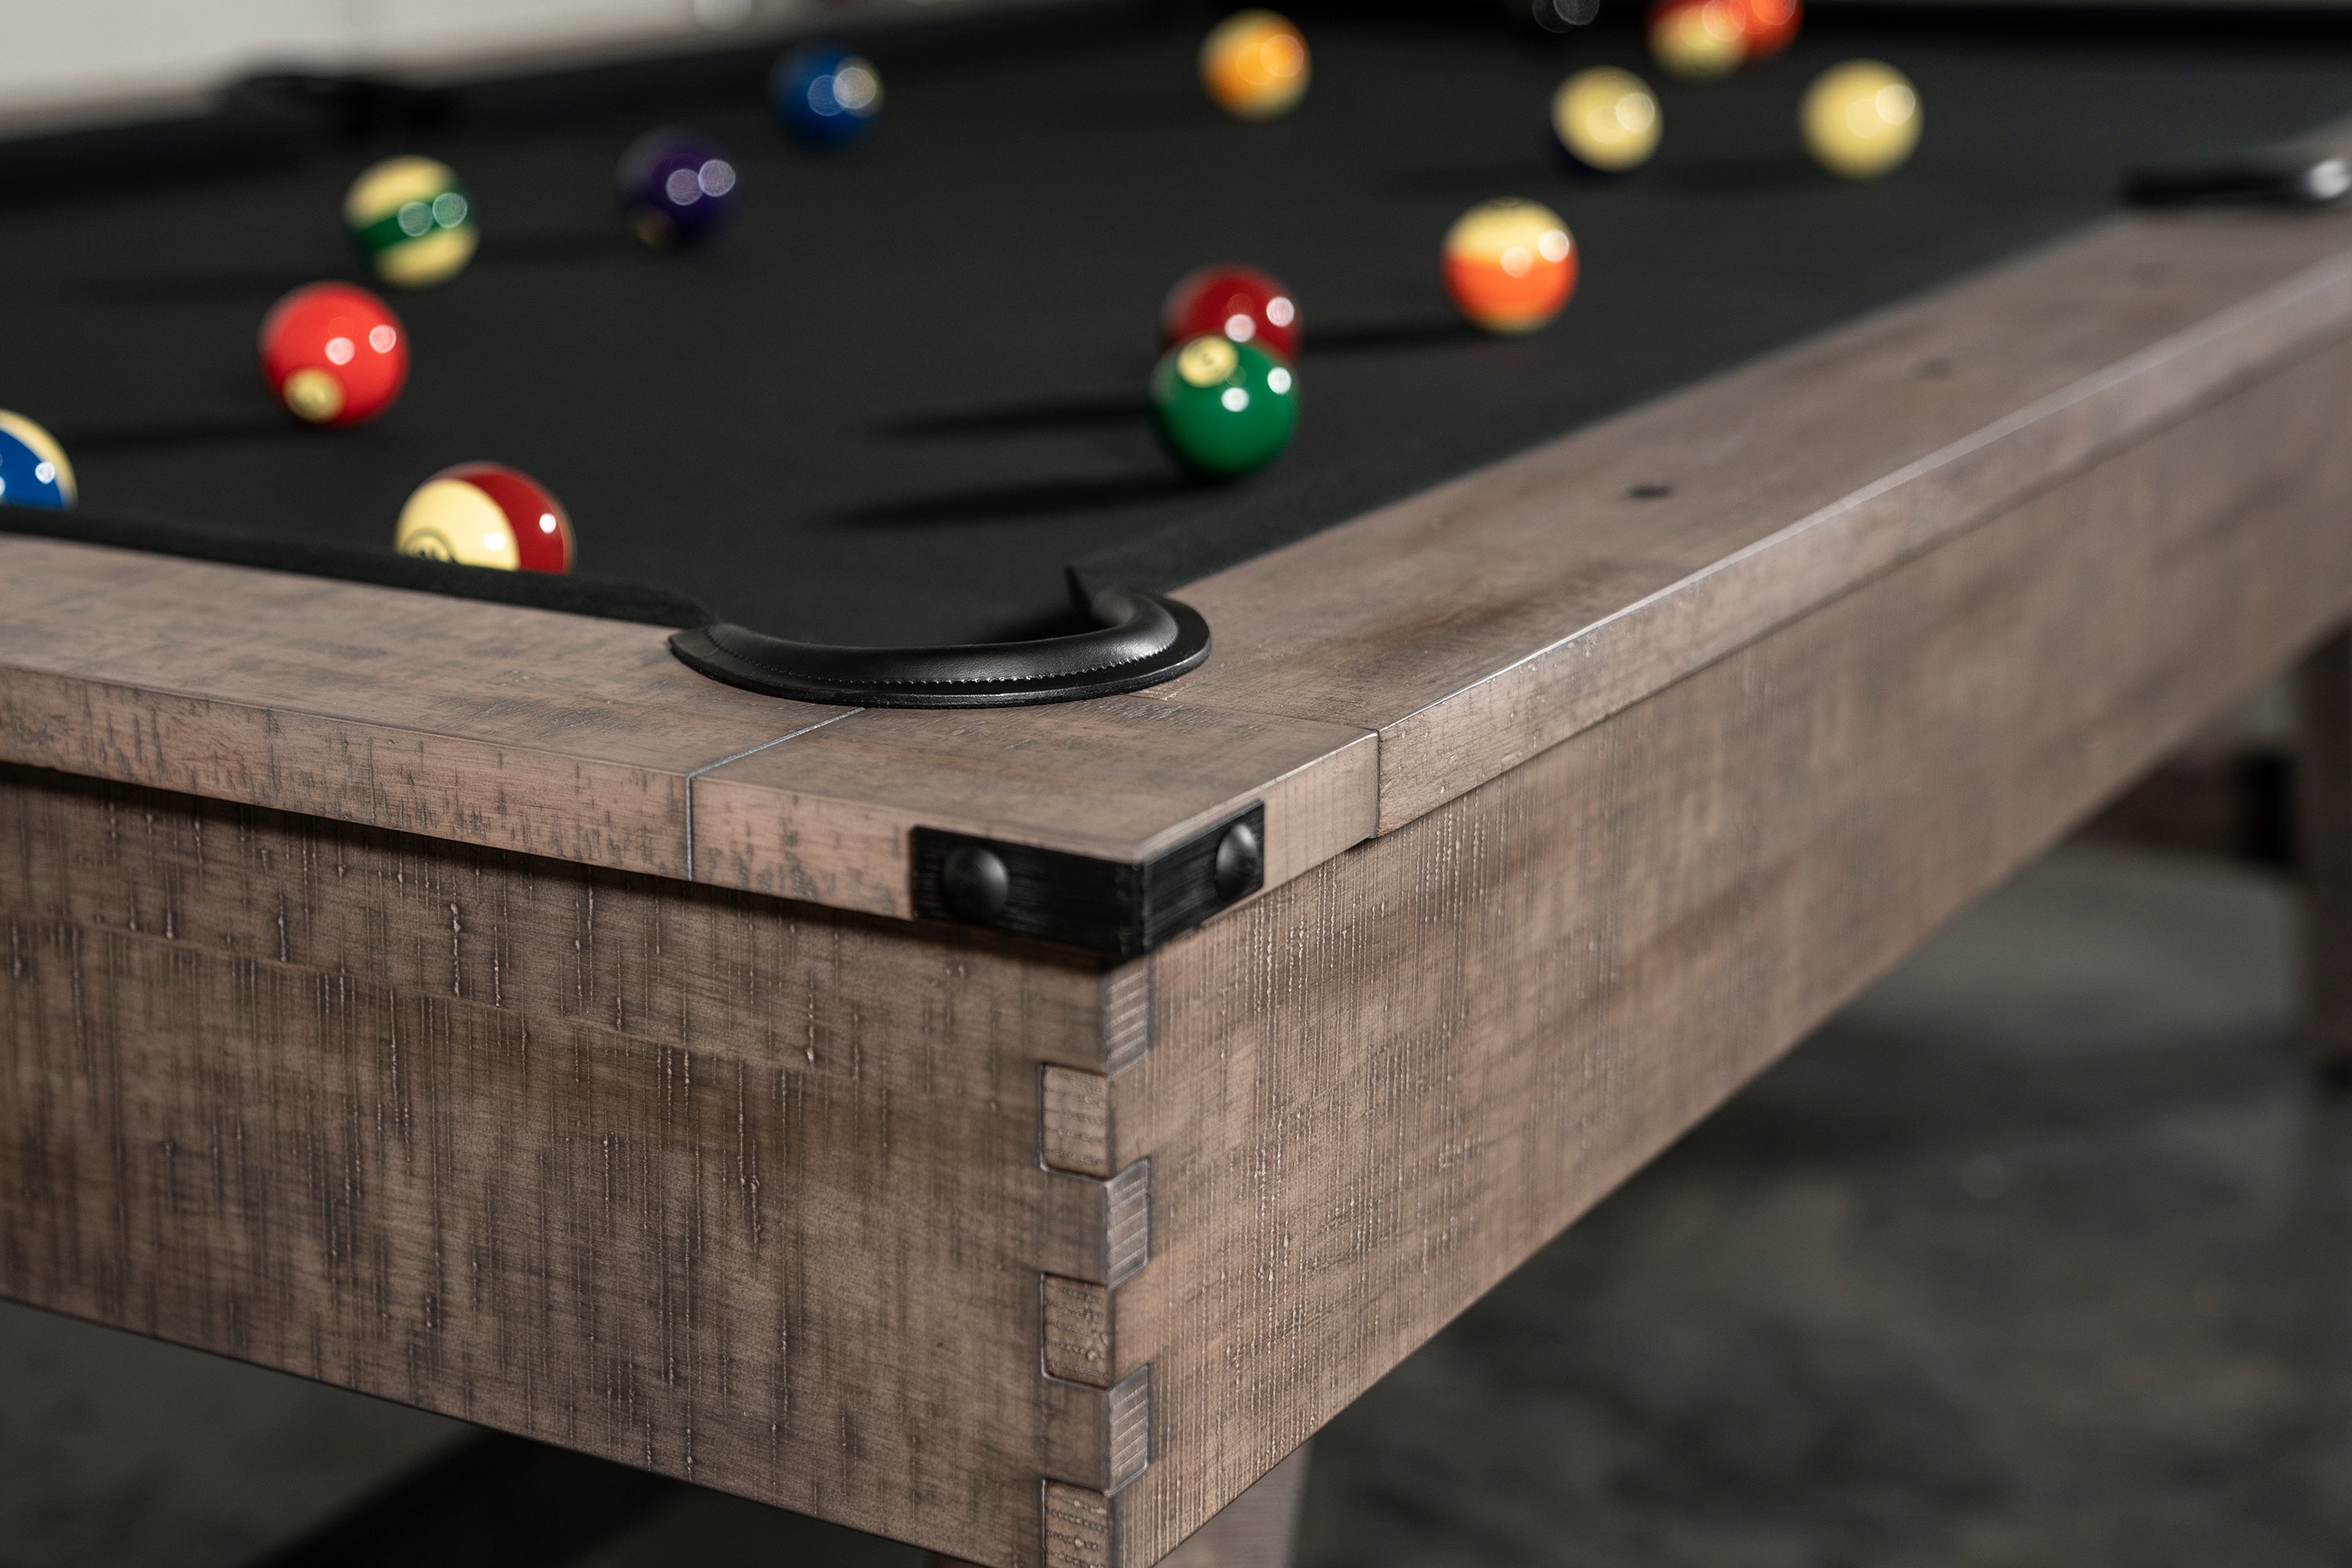 Nixon Hunter Slate Pool Table | Antique Finish with Wood Legs | Dining Top Option